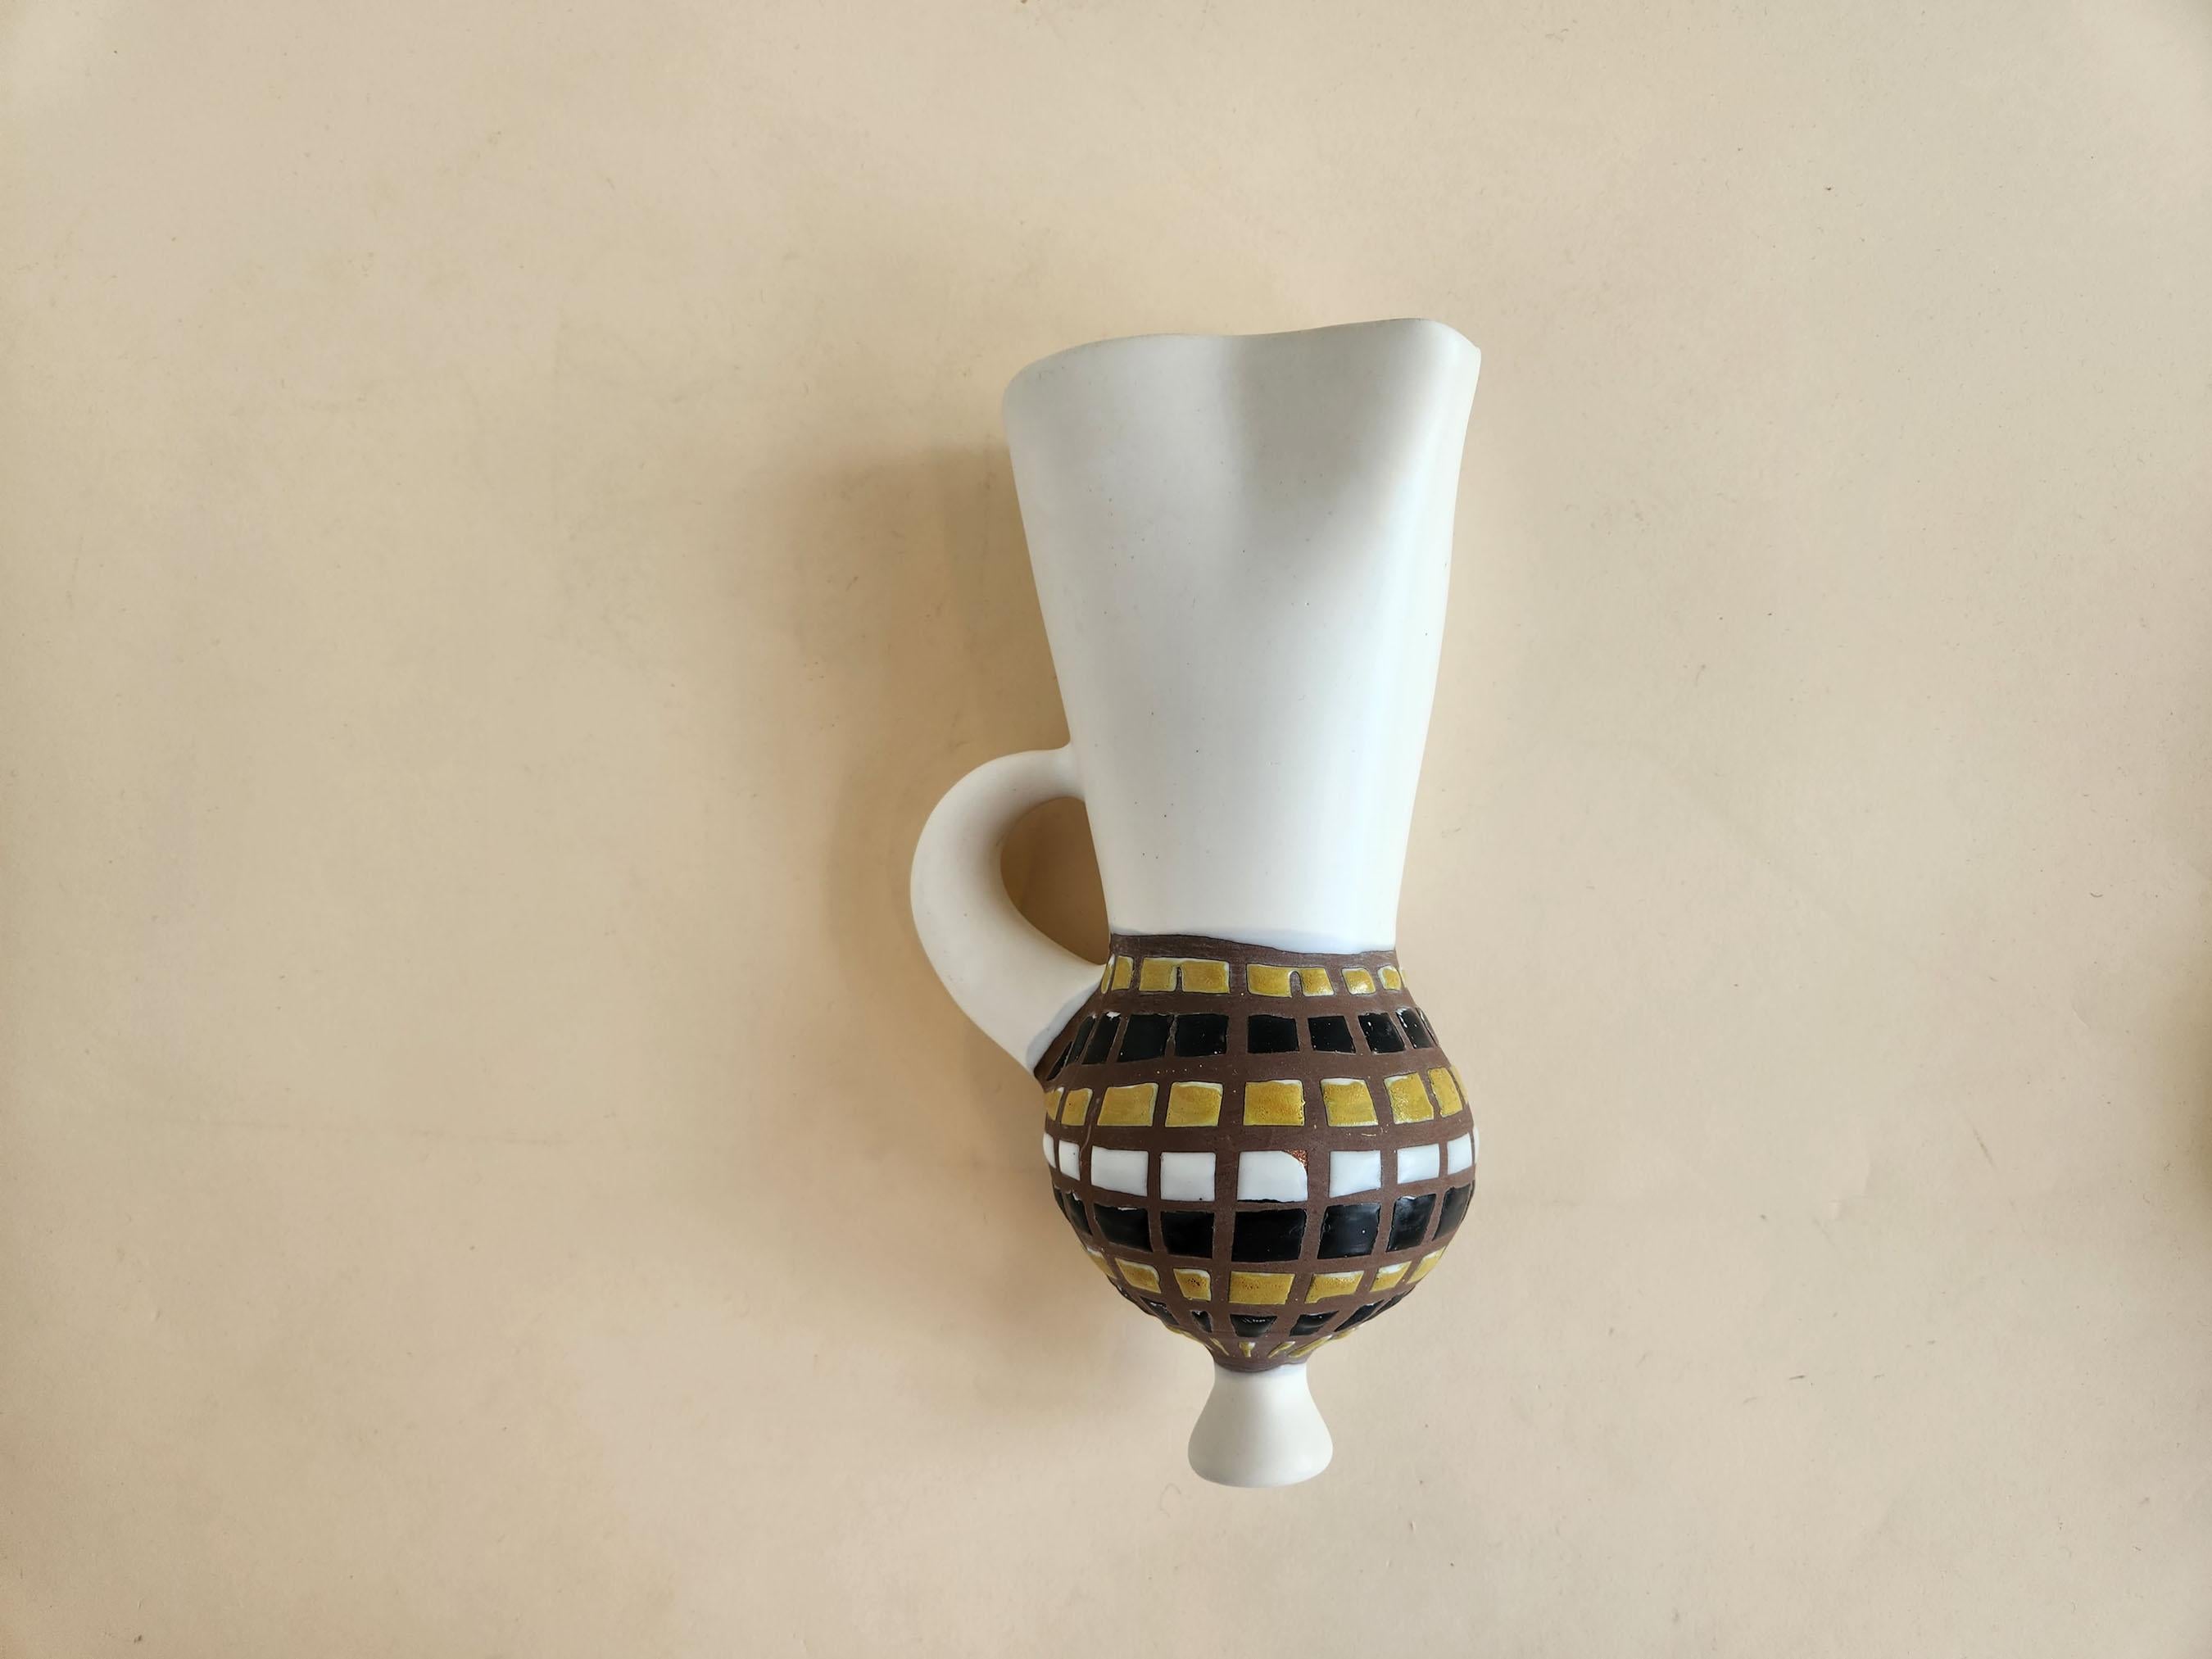 Vintage Ceramic Wall Mounted Vase with Cobblestones by Roger Capron - Vallauris, France

Roger Capron was in influential French ceramicist, known for his tiled tables and his use of recurring motifs such as stylized branches and geometrical suns.  